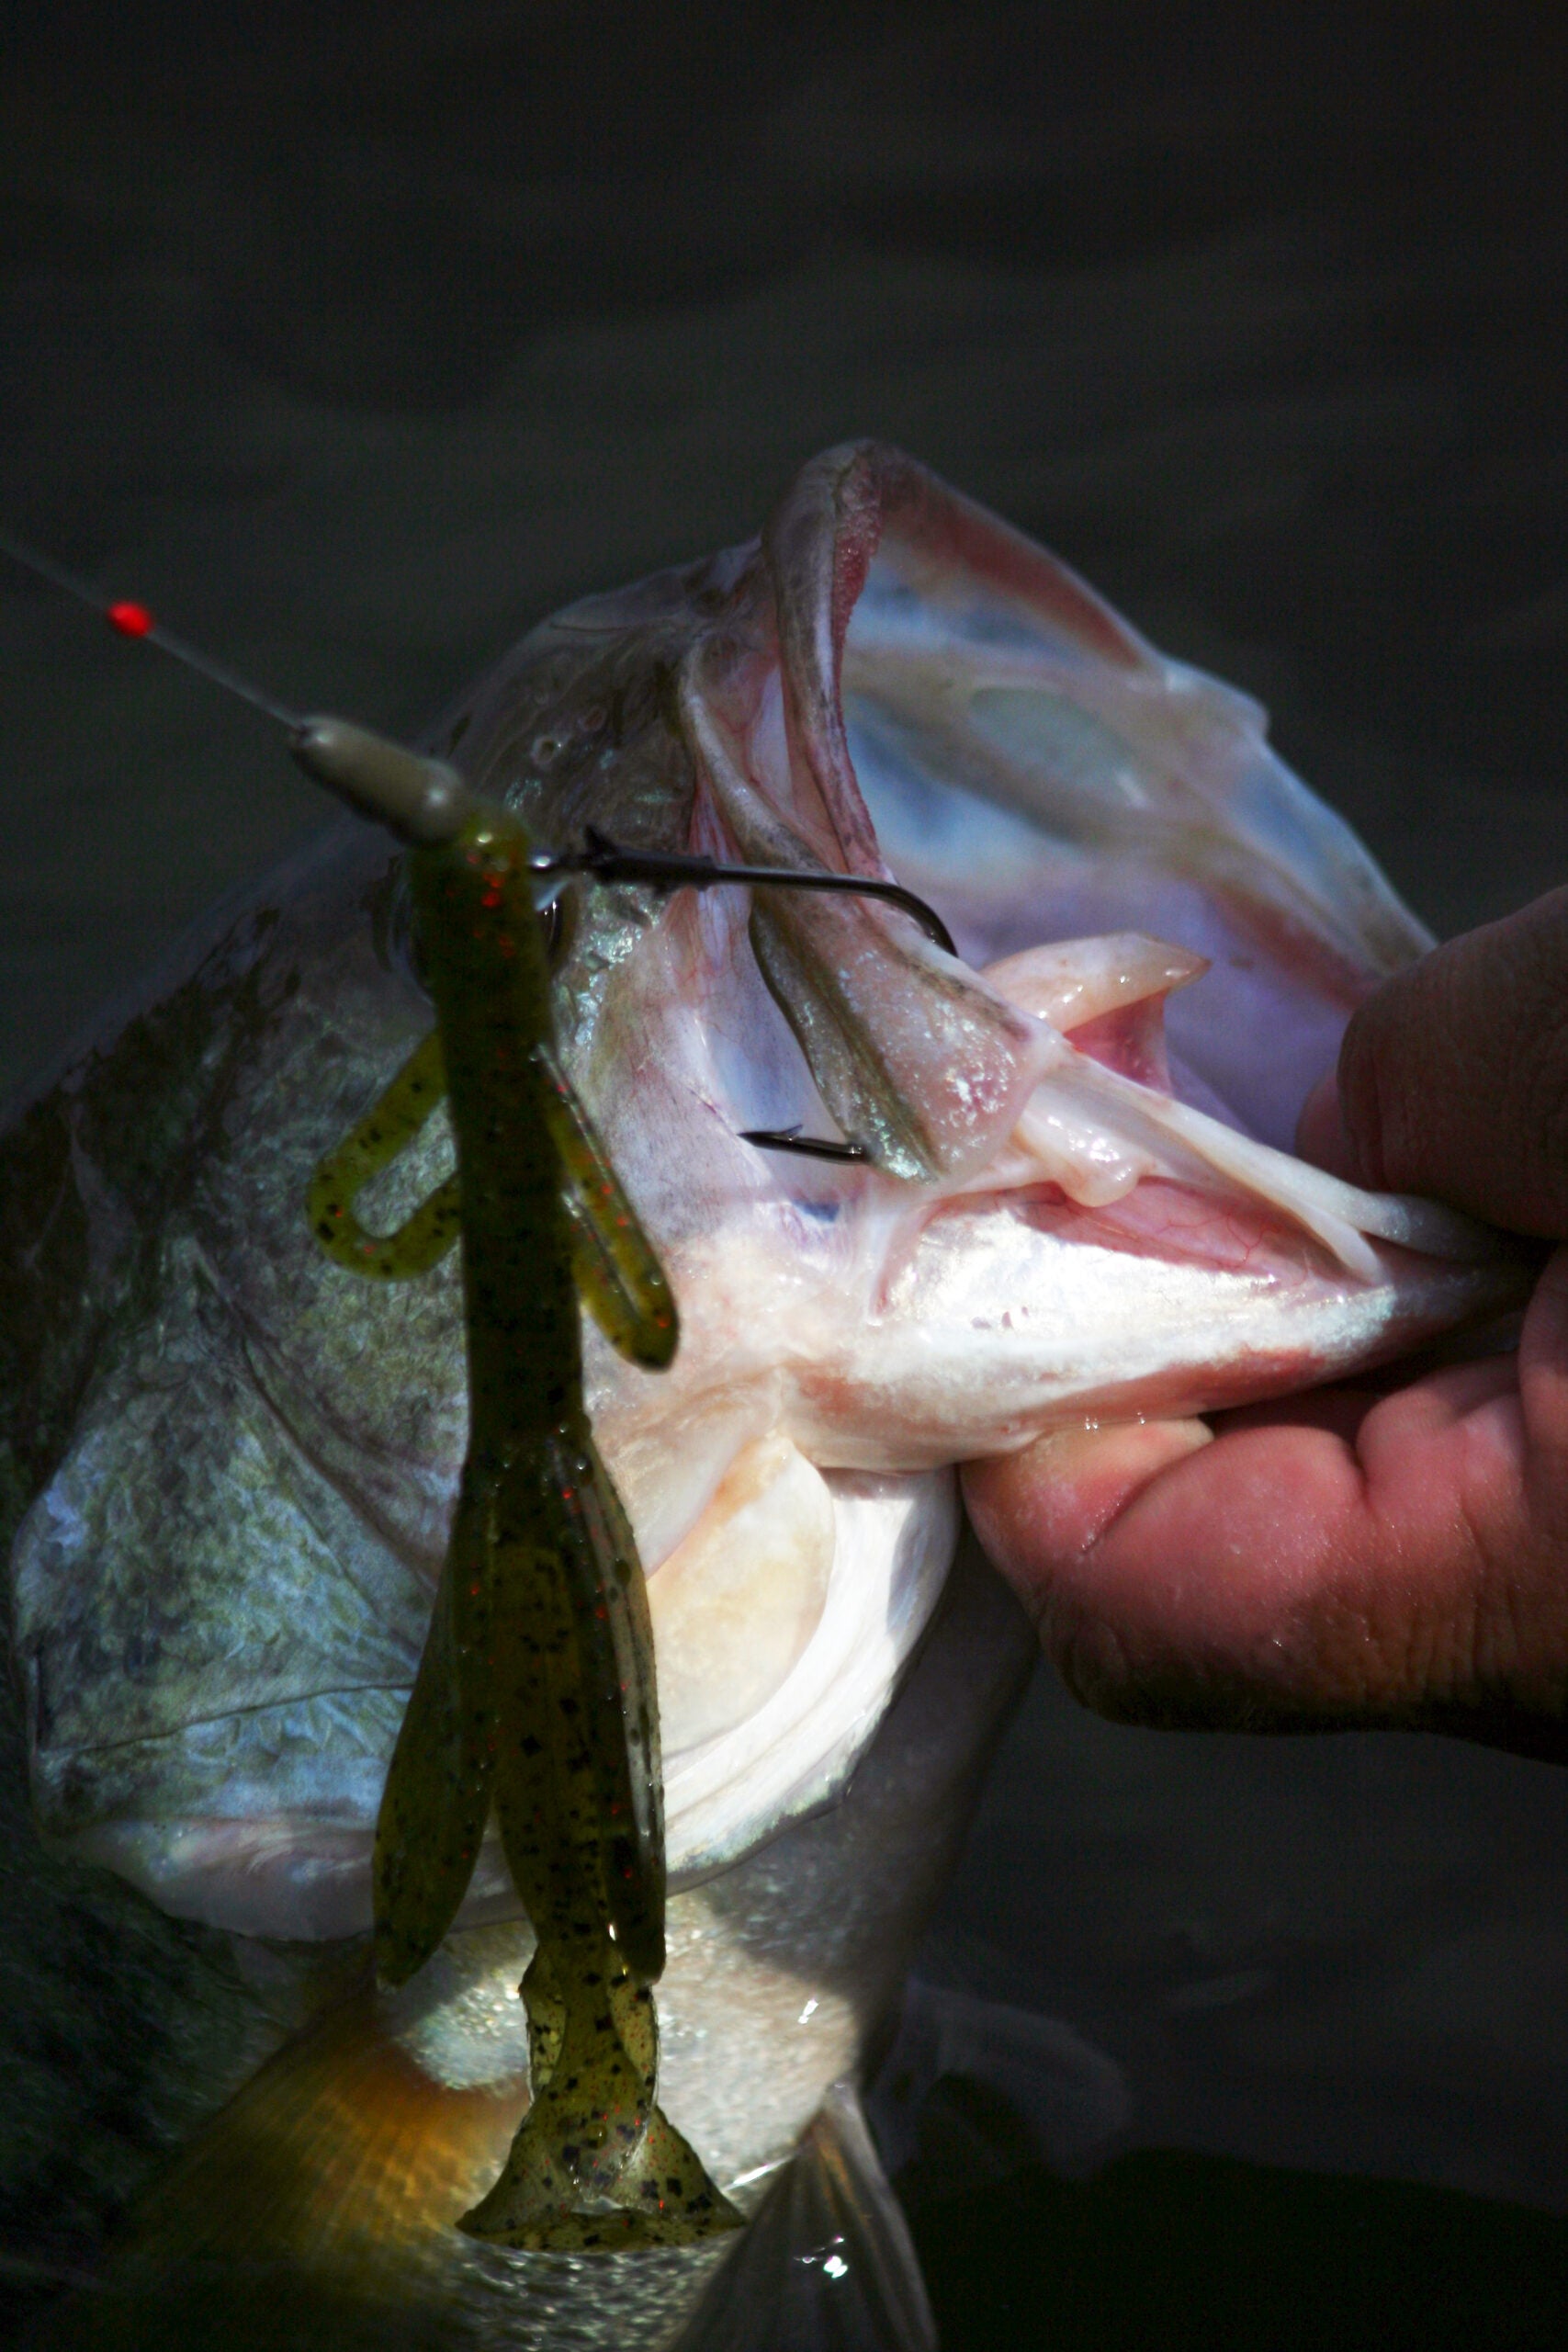 Cabin Creek out of business? - Fishing Tackle - Bass Fishing Forums